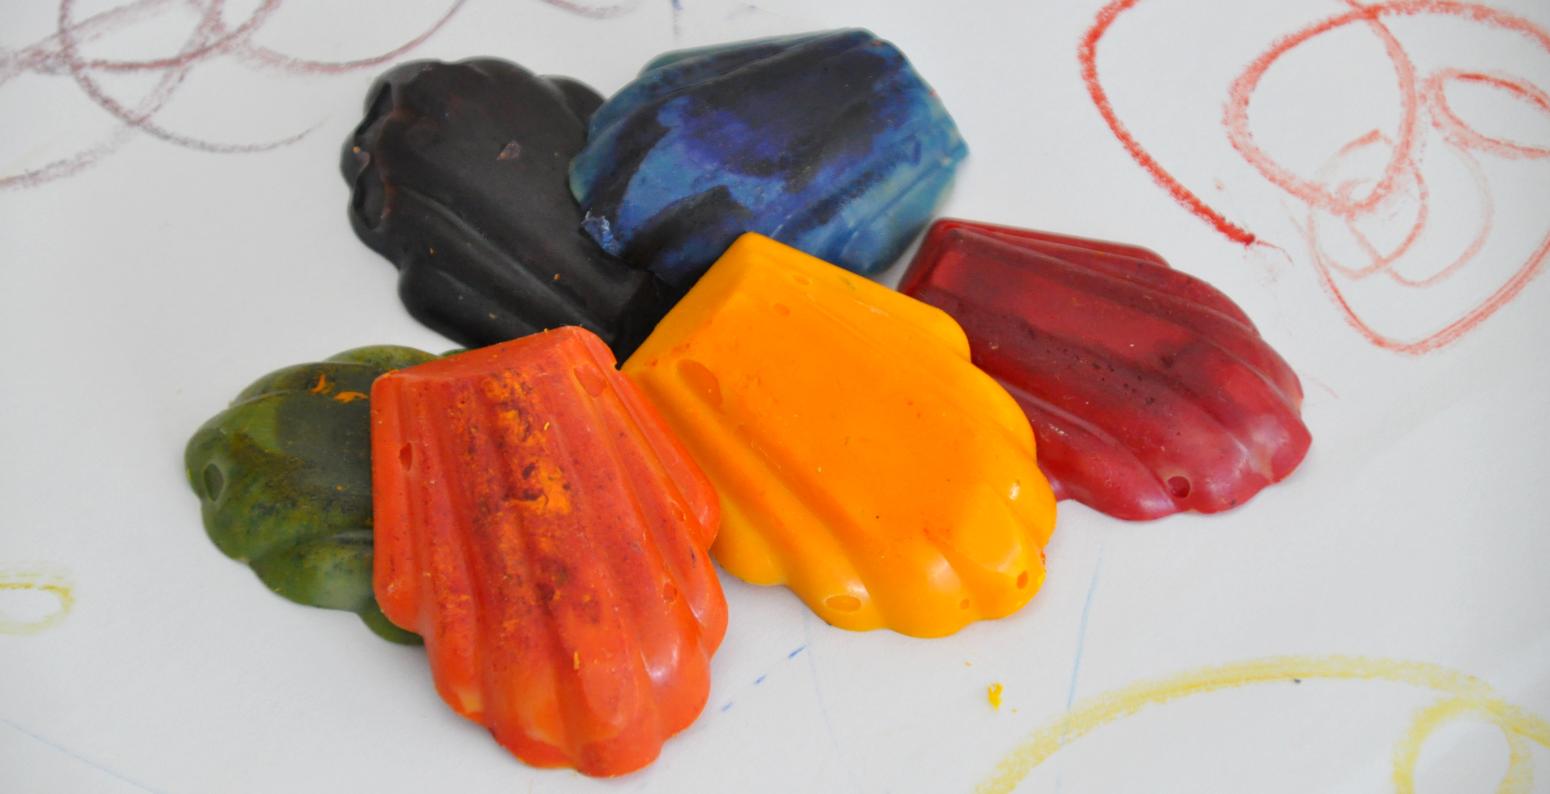 Colorful homemade crayons in the shape of madeleine cookies surrounded by scribbles on white paper.